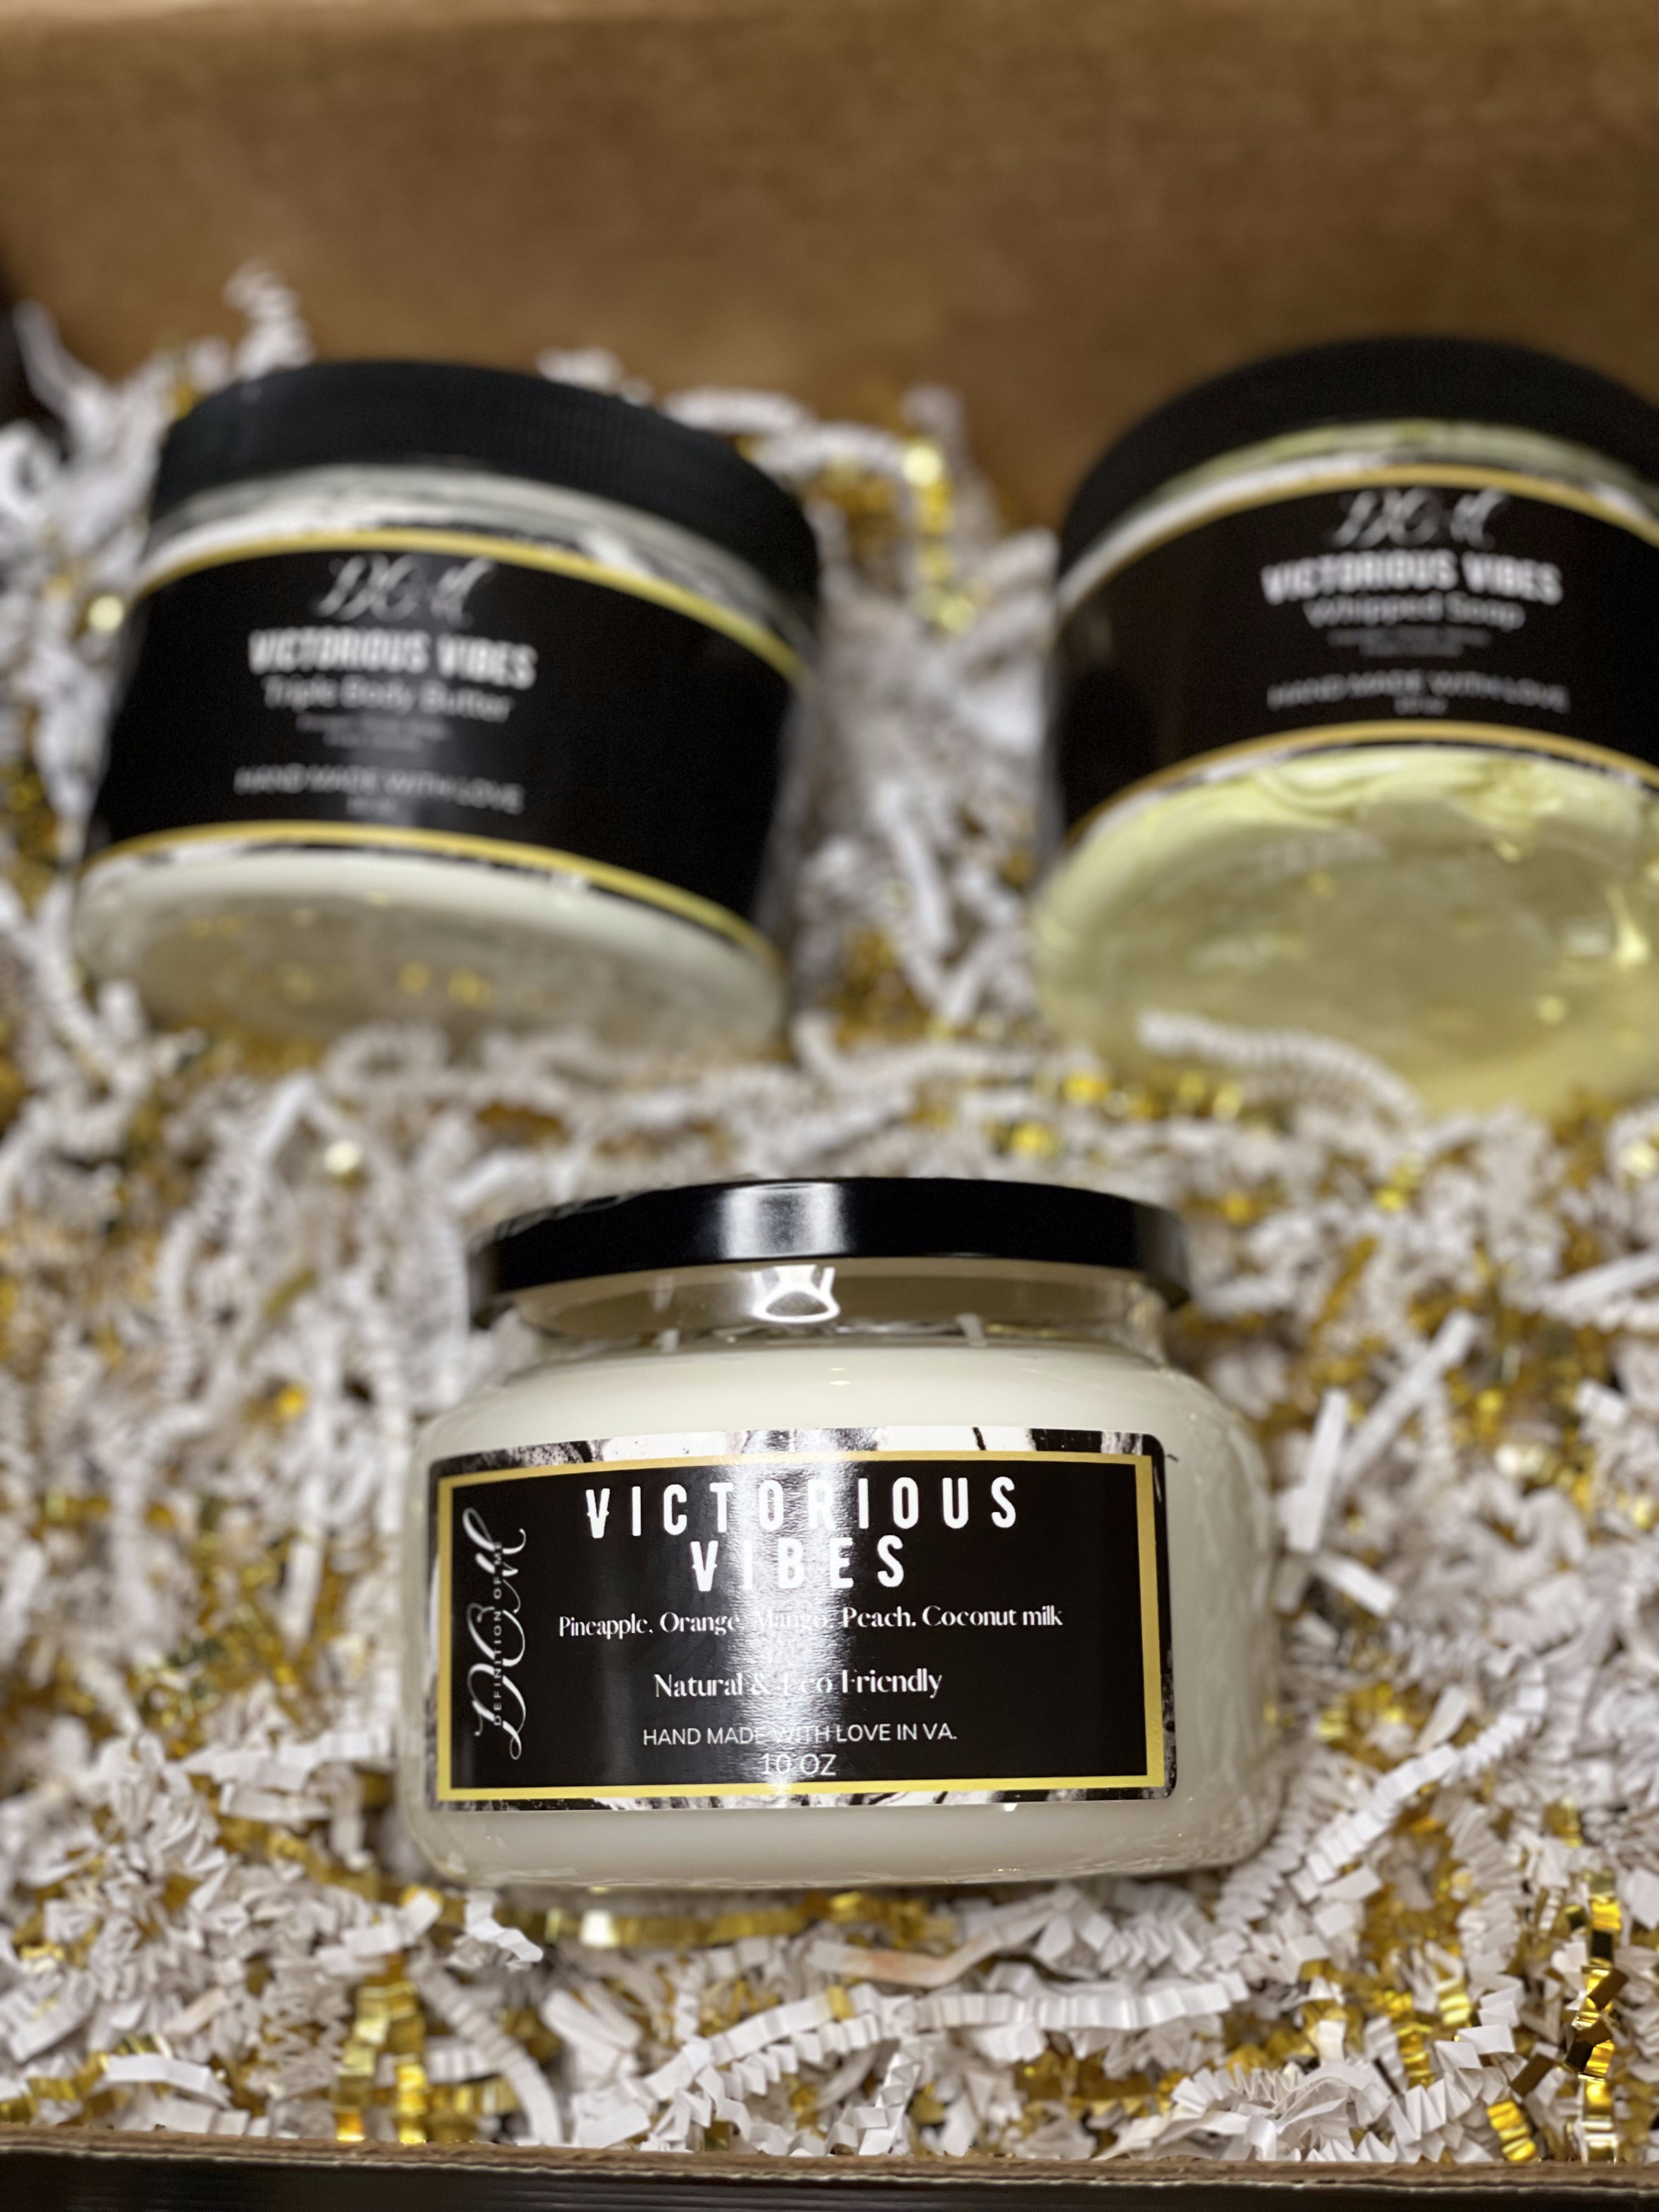 Gift Set 2- 1 Candle (Your Choice) With Victorious Vibes Body Butter & Whipped Soap